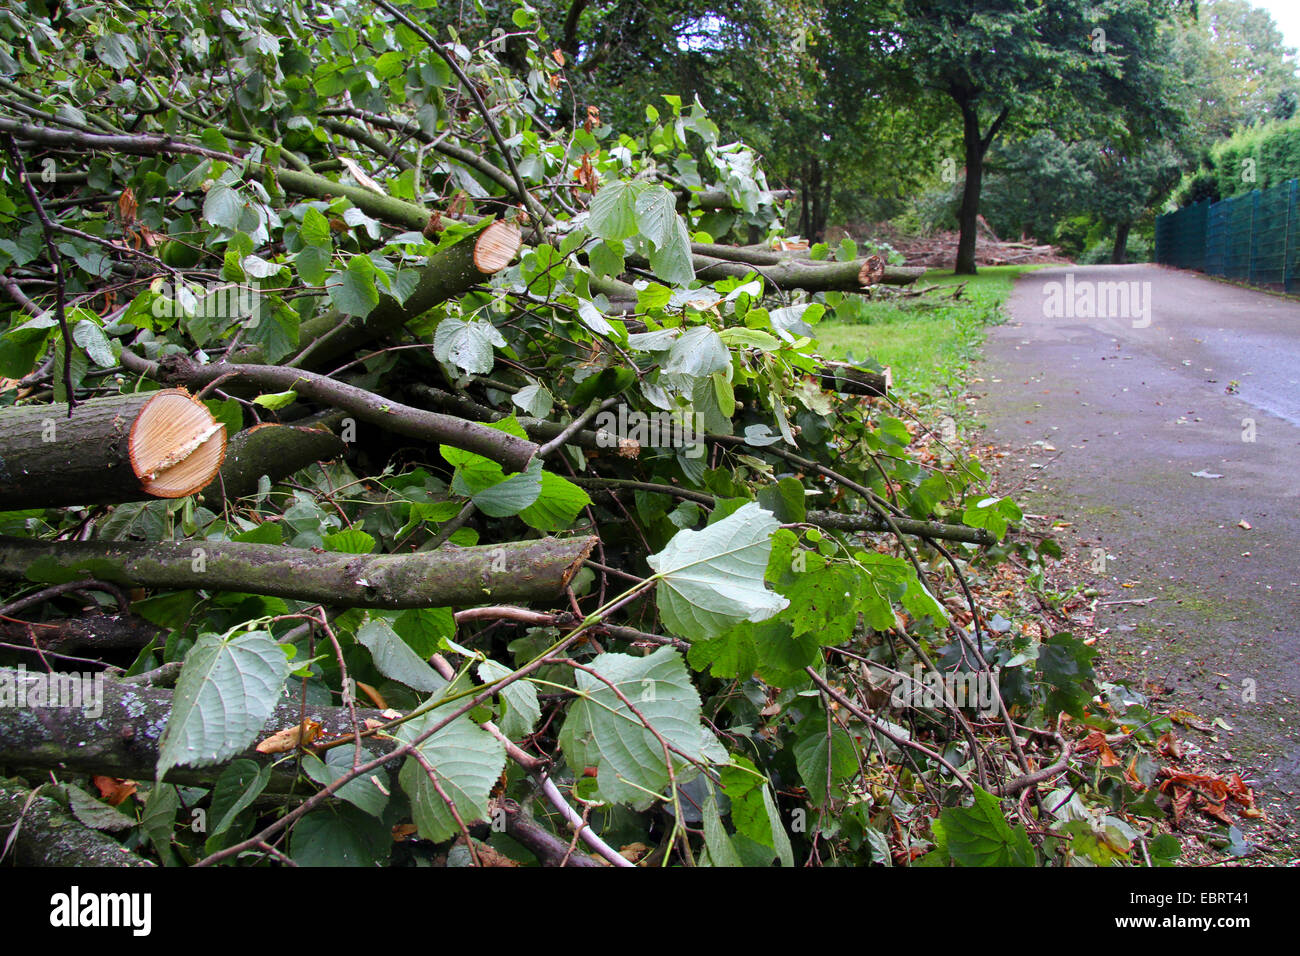 heaps of branches waysides after storm, Germany, North Rhine-Westphalia, Ruhr Area, Essen Stock Photo